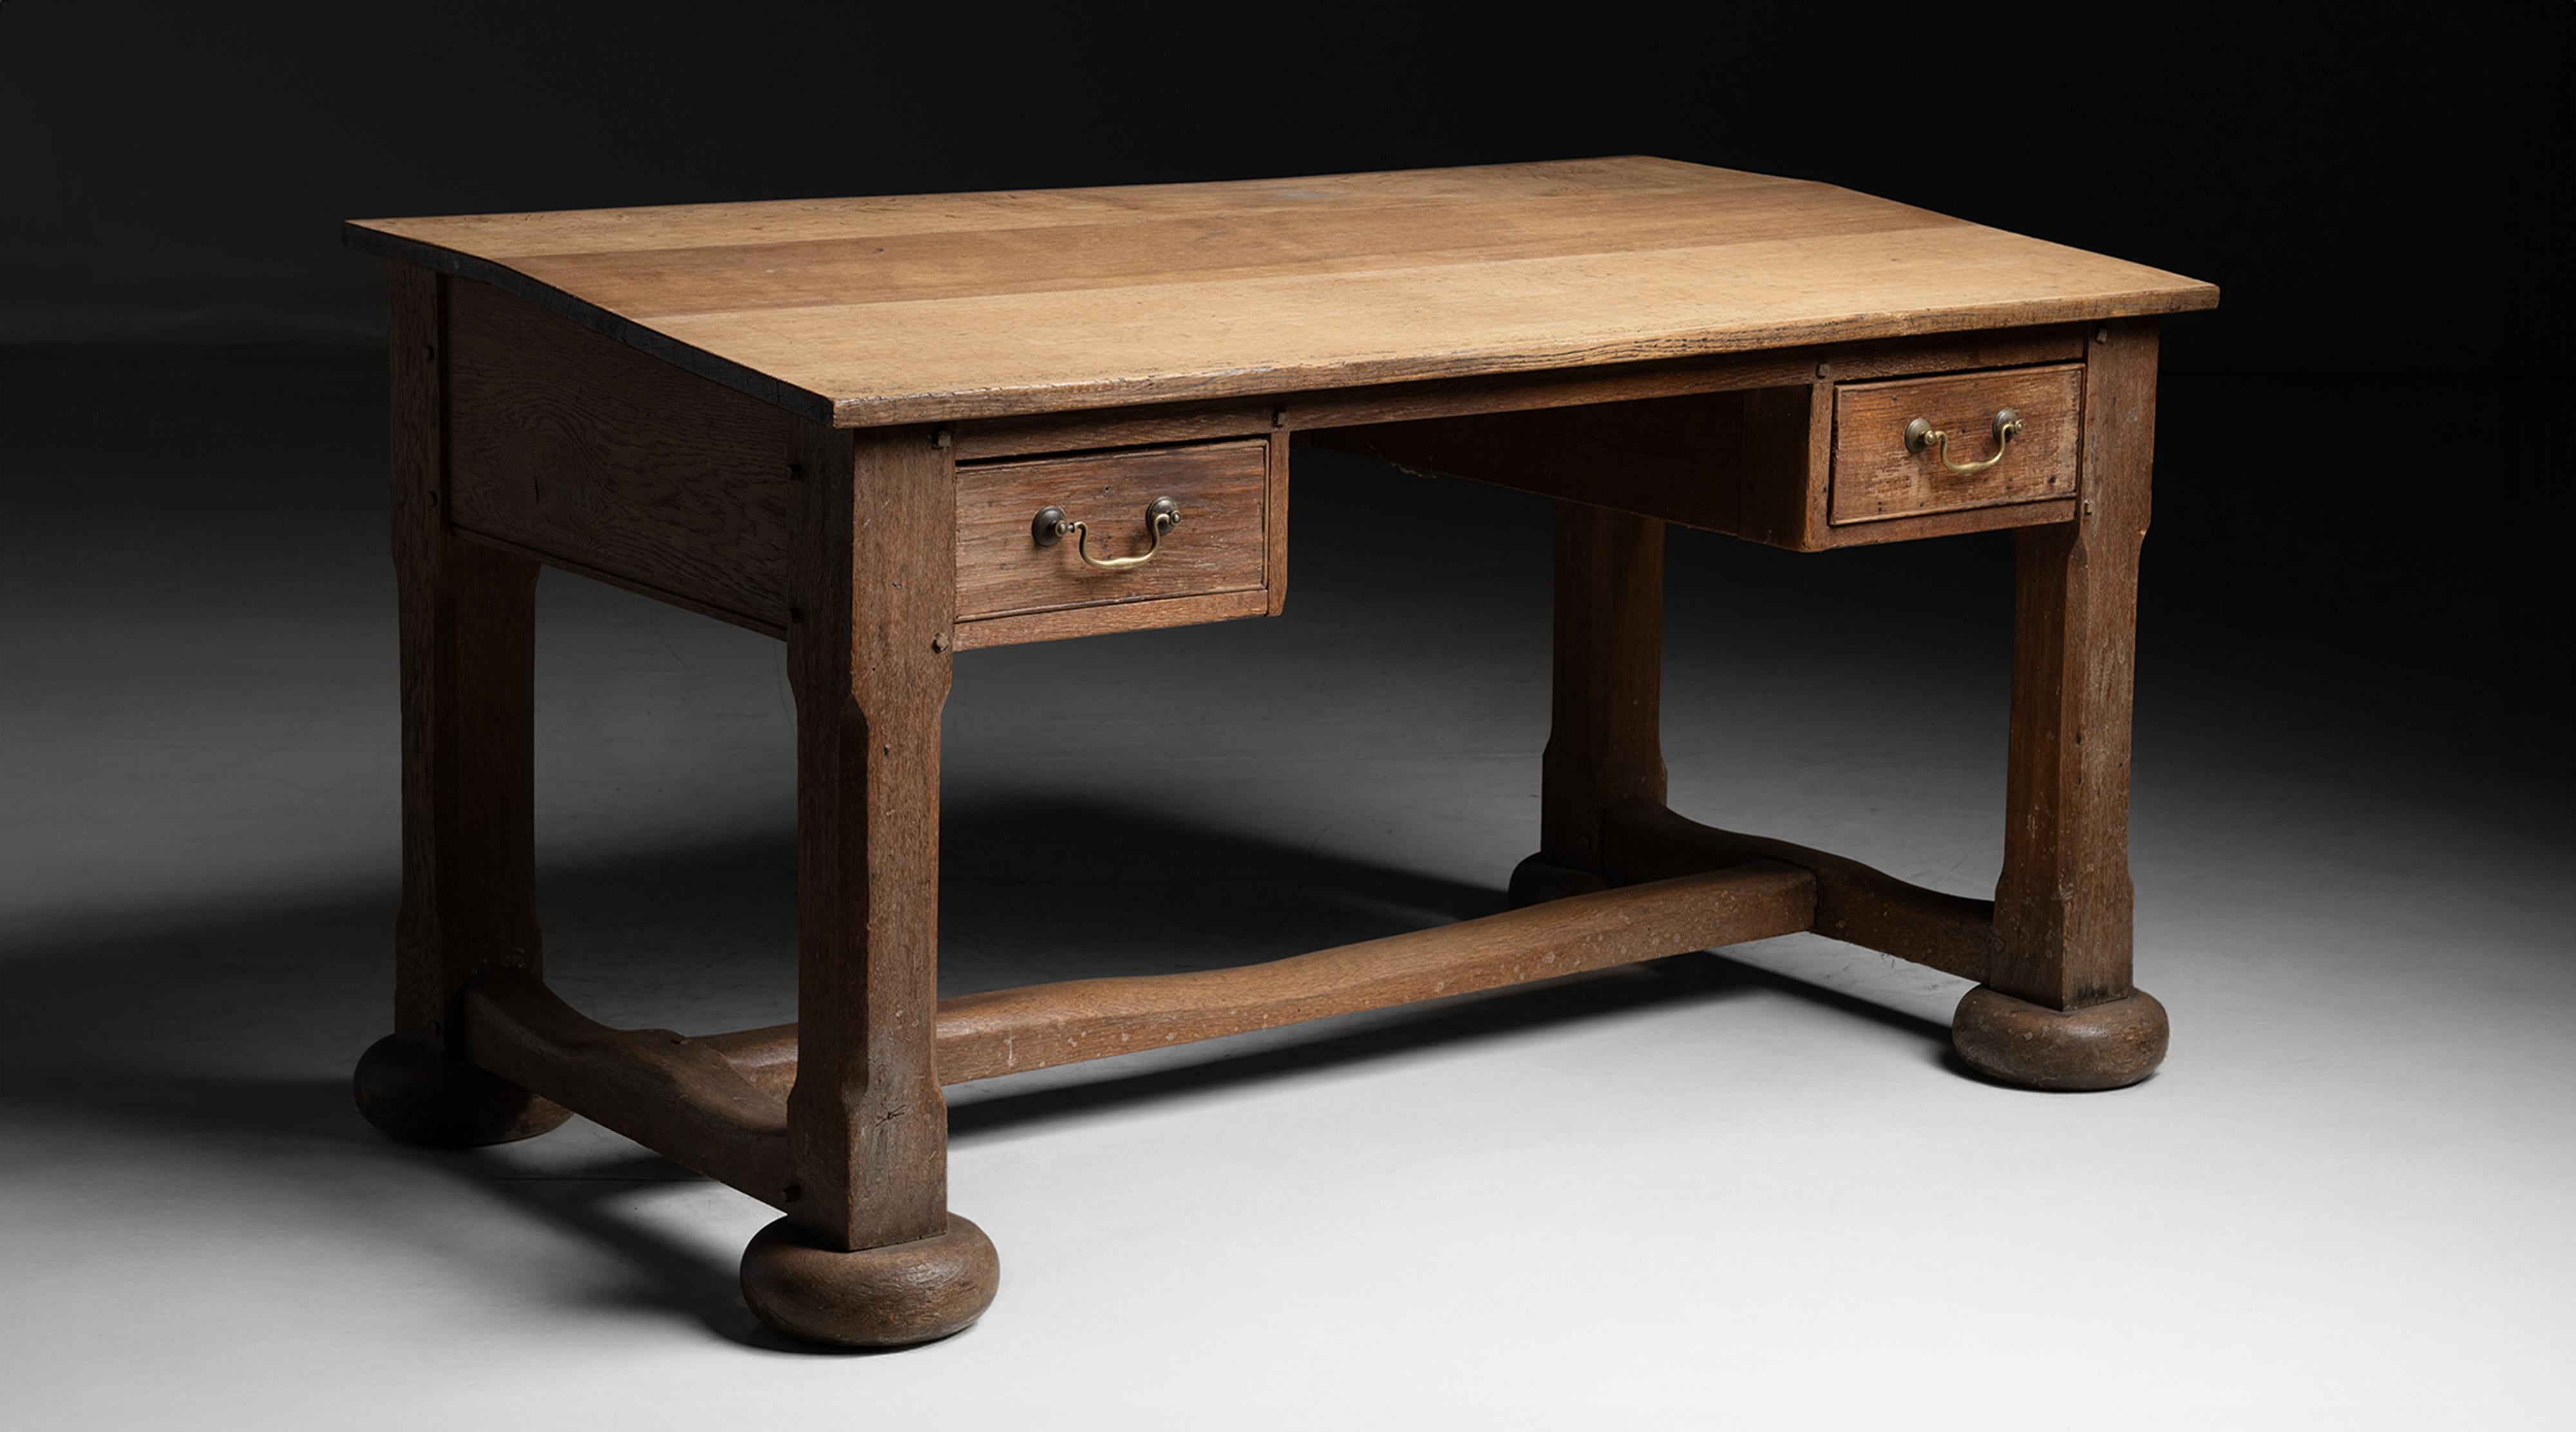 Oak Desk
England circa 1820
Estate made desk with two front drawers, stretcher, and angled surface.
58.75”L x 32.75”d x 32”h